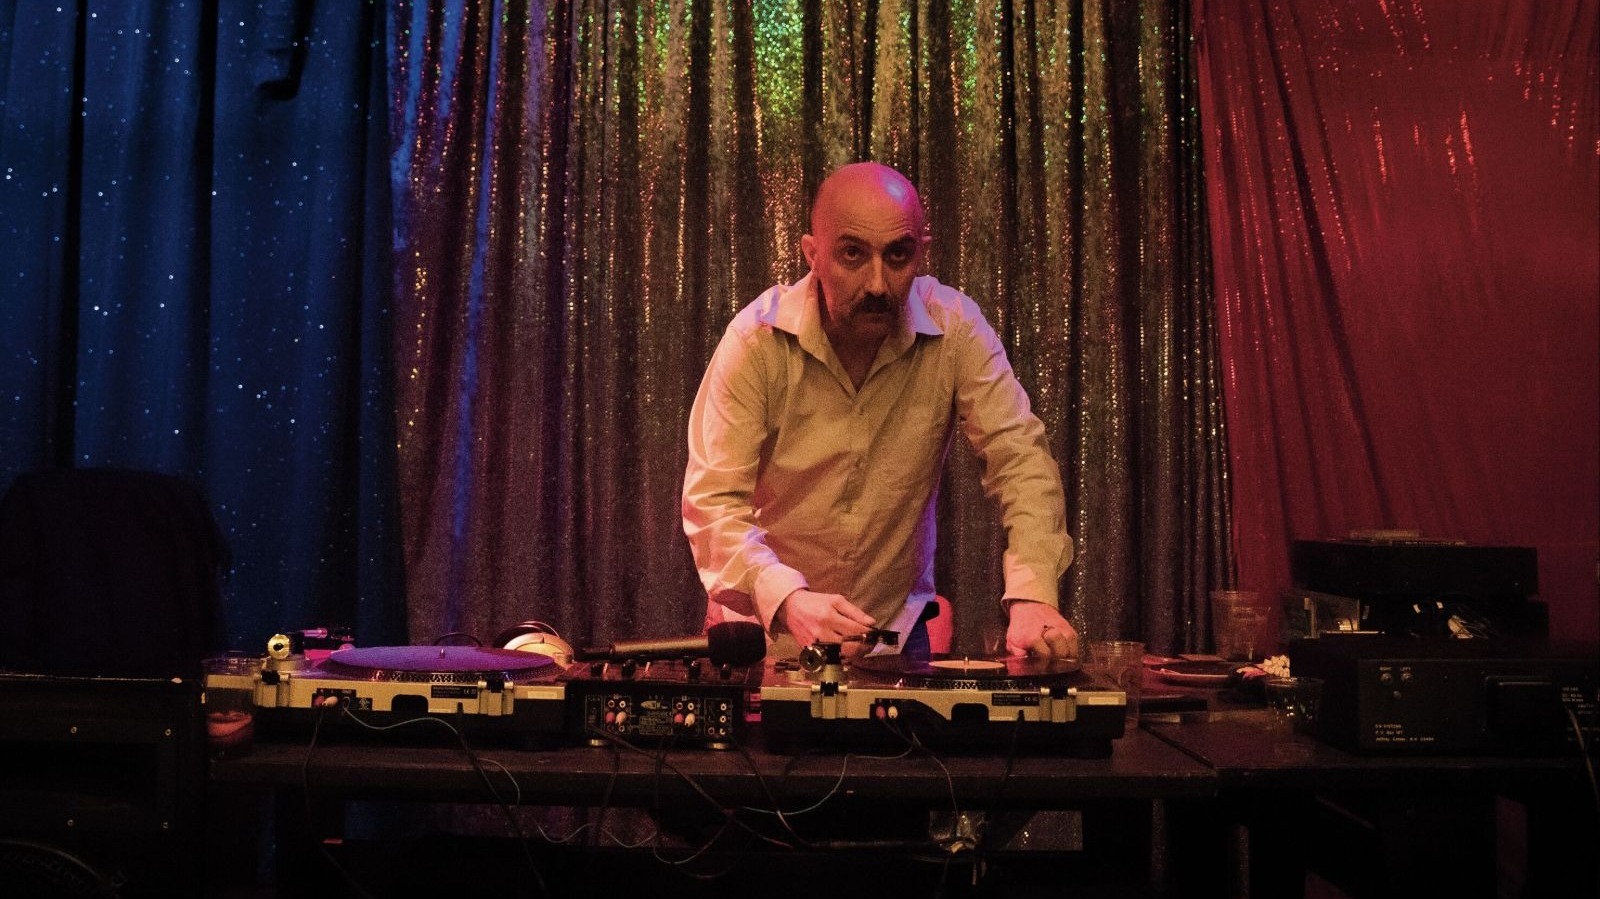 Gaspar Noé, director of the Vortex, talks about crying, death and drugs [Interview]